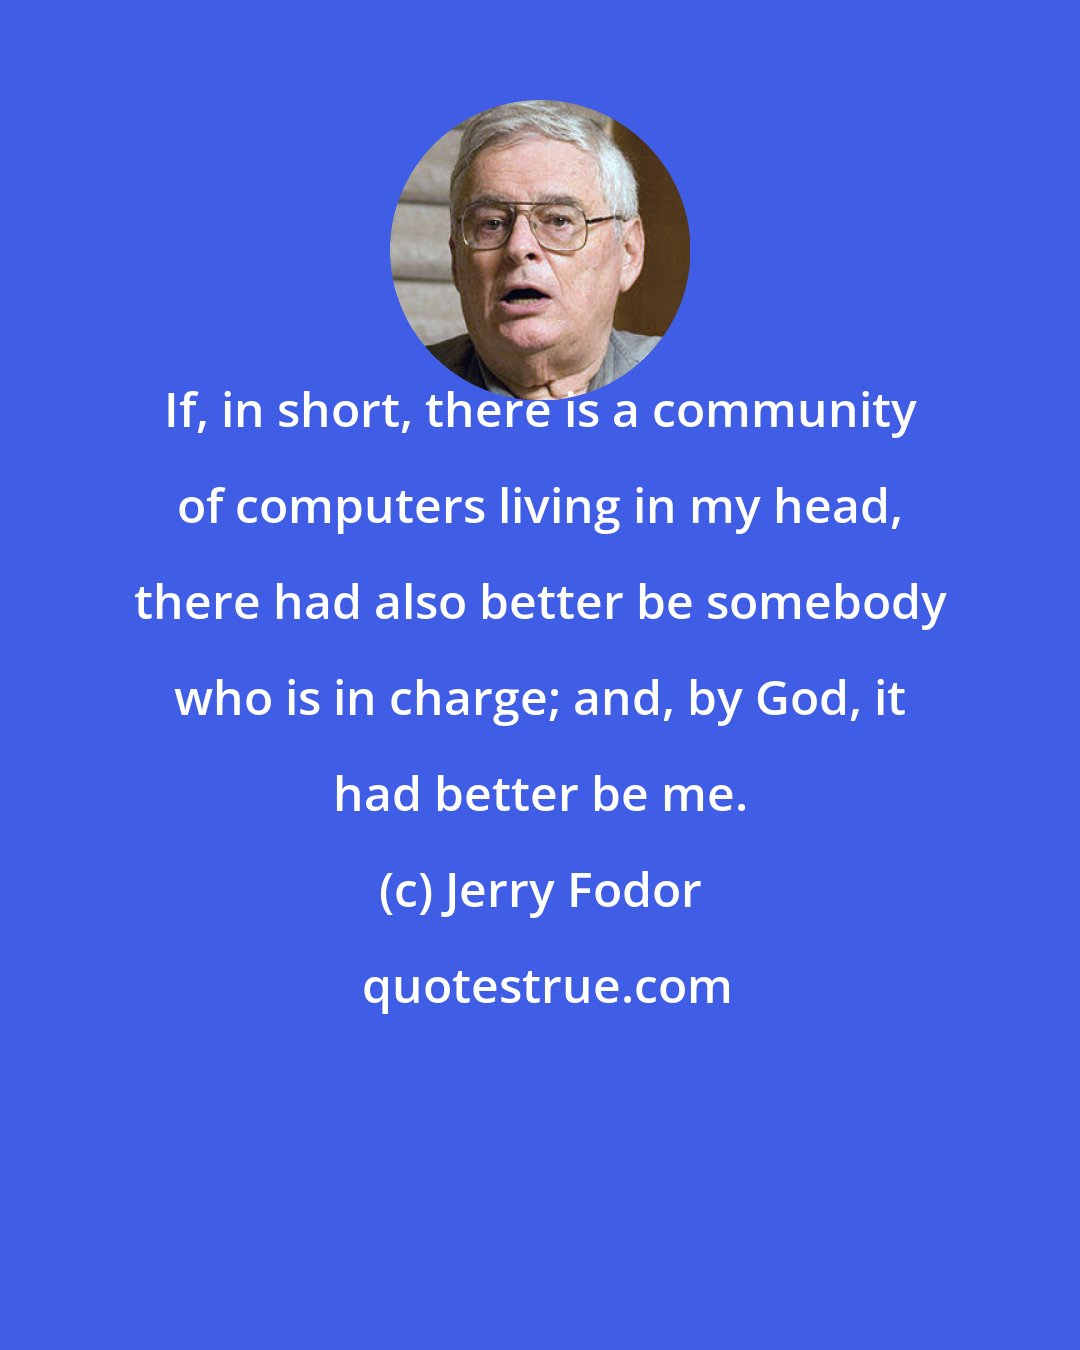 Jerry Fodor: If, in short, there is a community of computers living in my head, there had also better be somebody who is in charge; and, by God, it had better be me.